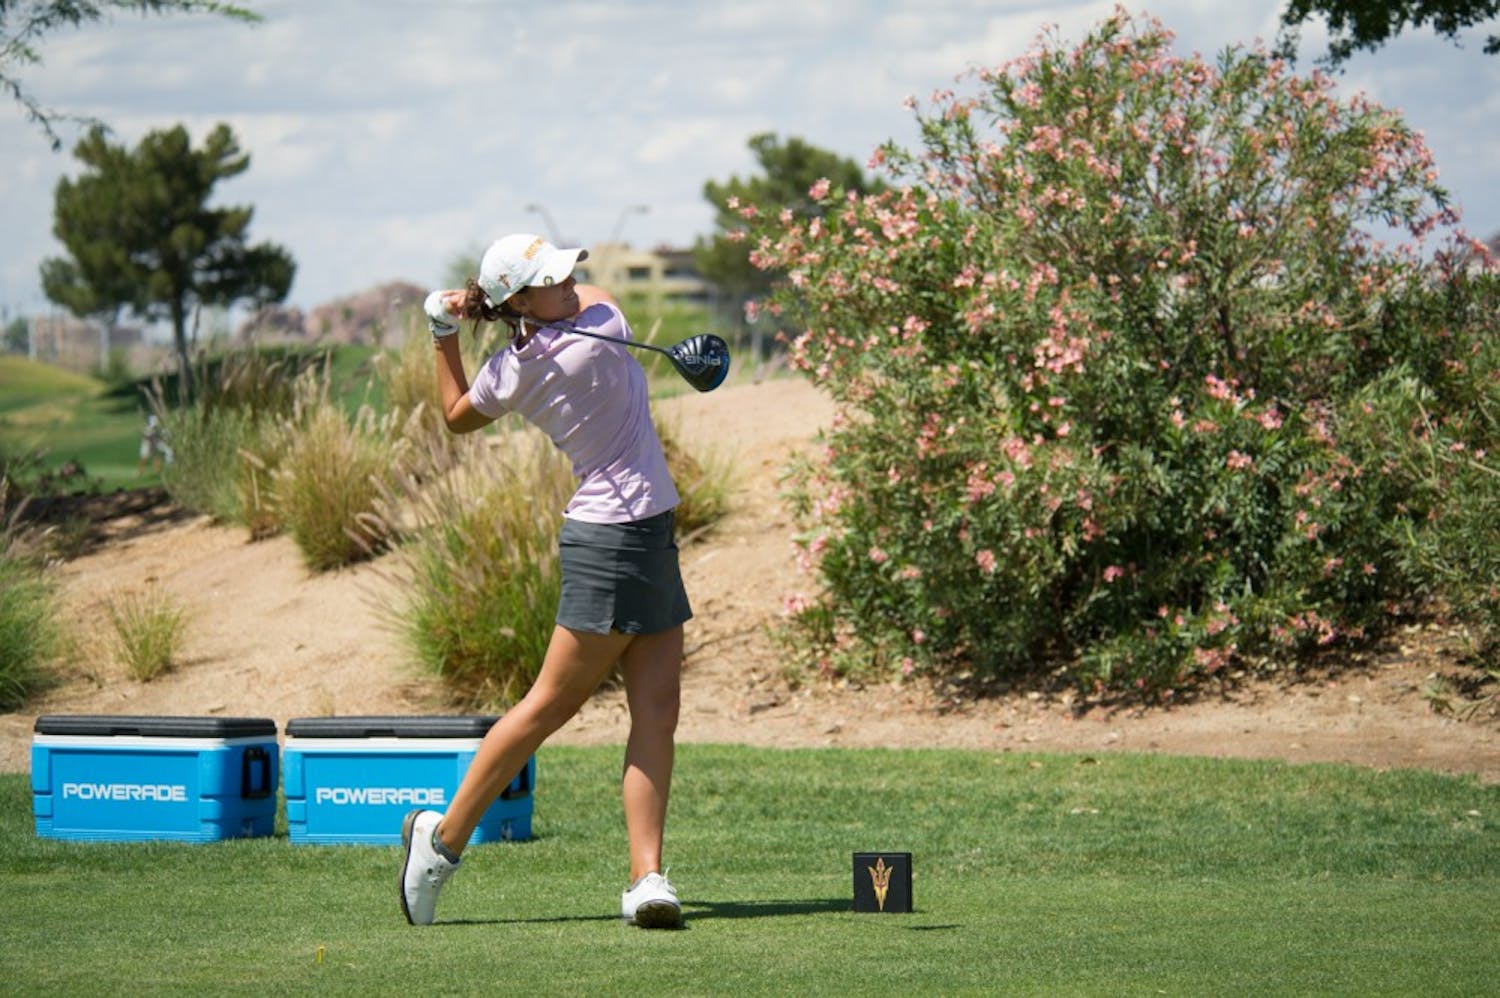 Roberta Liti tees off from the 5th tee box on Friday, April 8, 2016 during the 2016 Ping ASU Invitational at Karsten Golf Course in Tempe, Arizona.